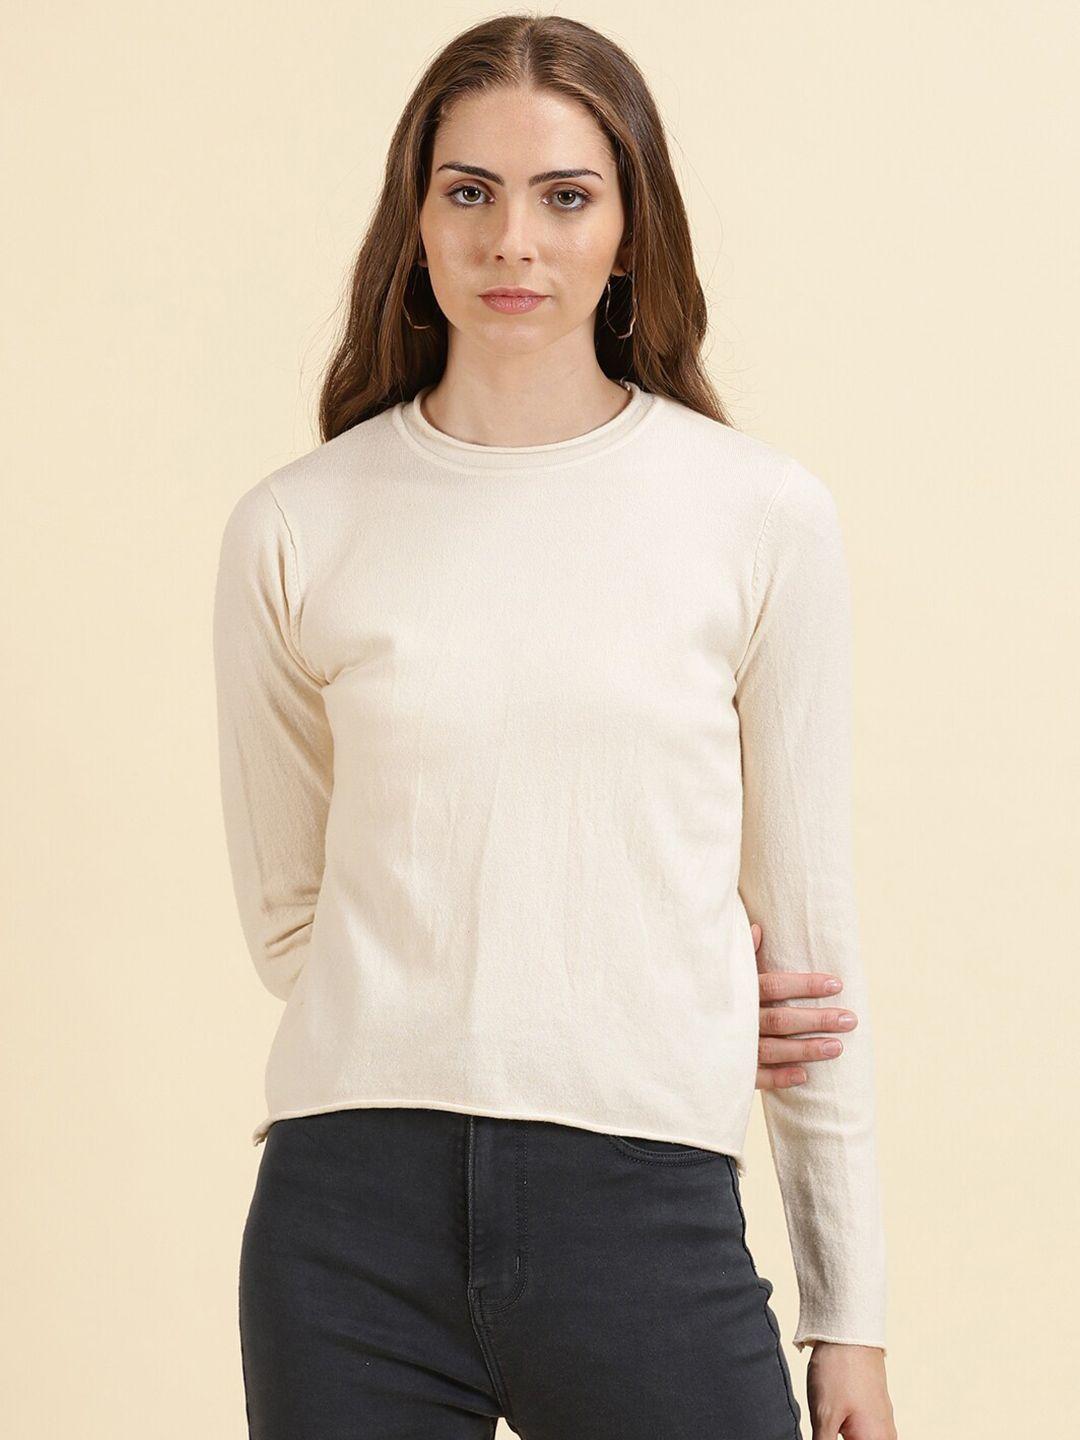 showoff-round-neck-long-sleeves-top